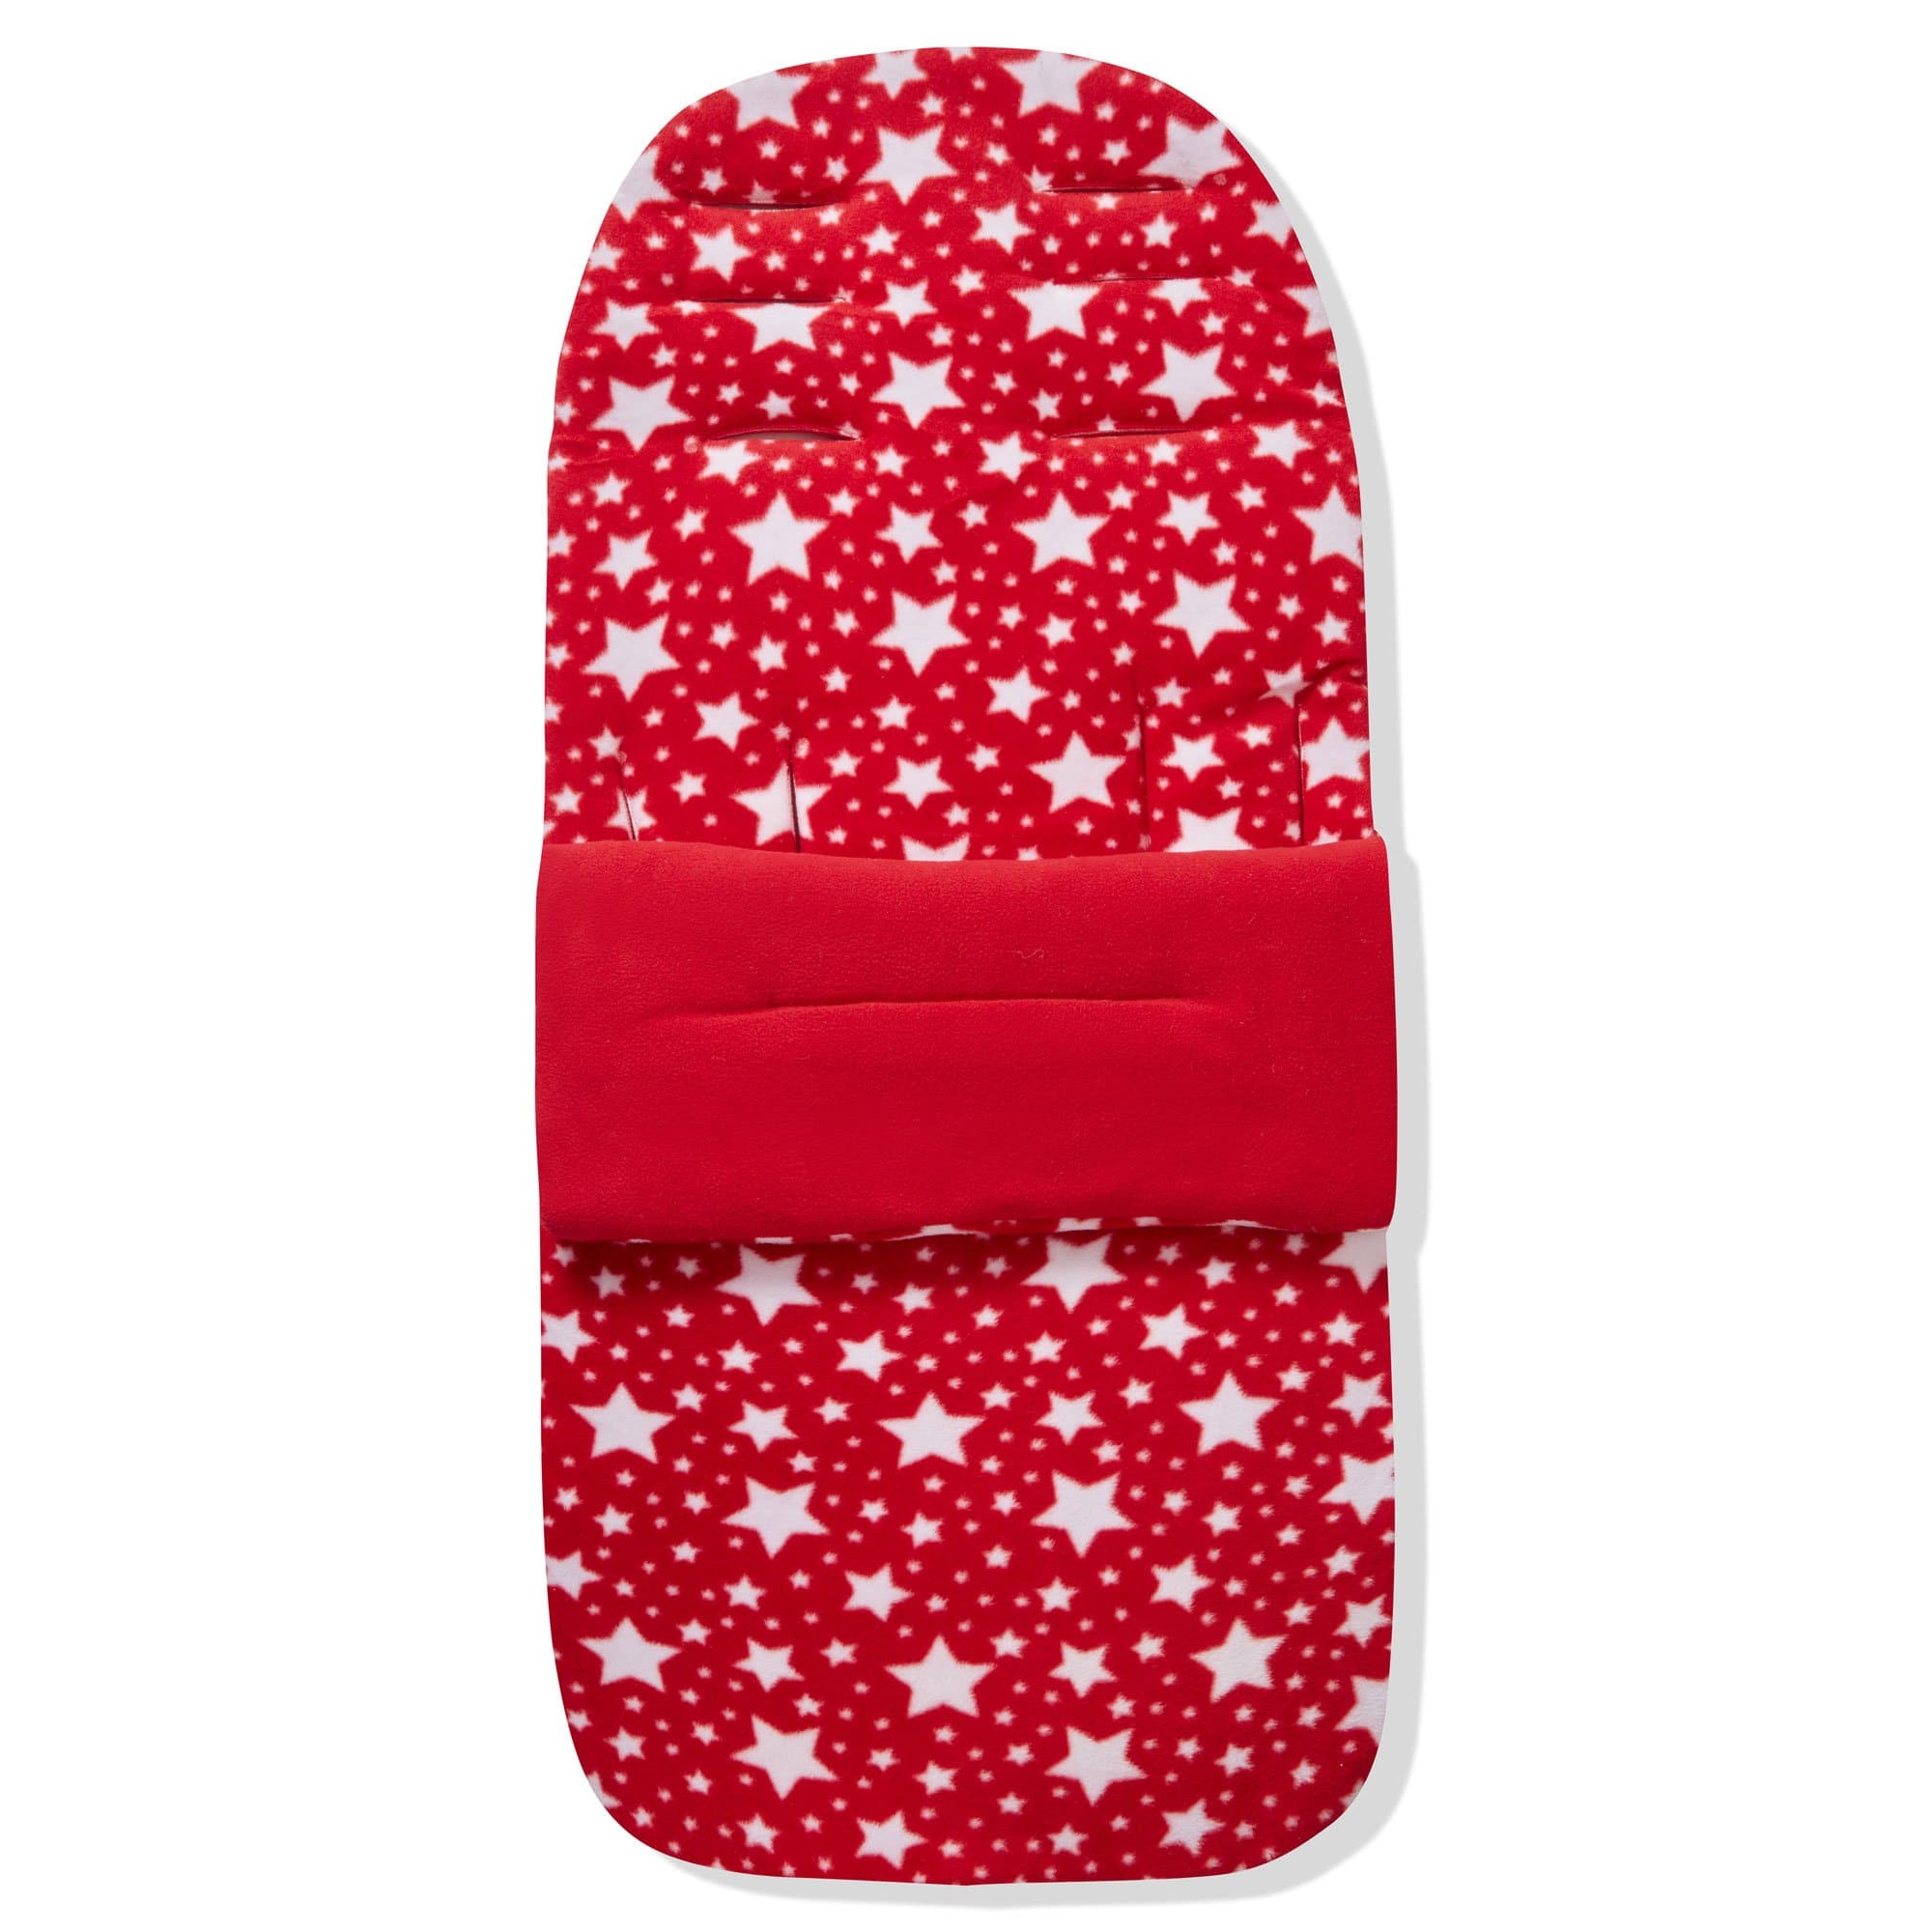 Fleece Footmuff / Cosy Toes Compatible with Tippitoes - For Your Little One